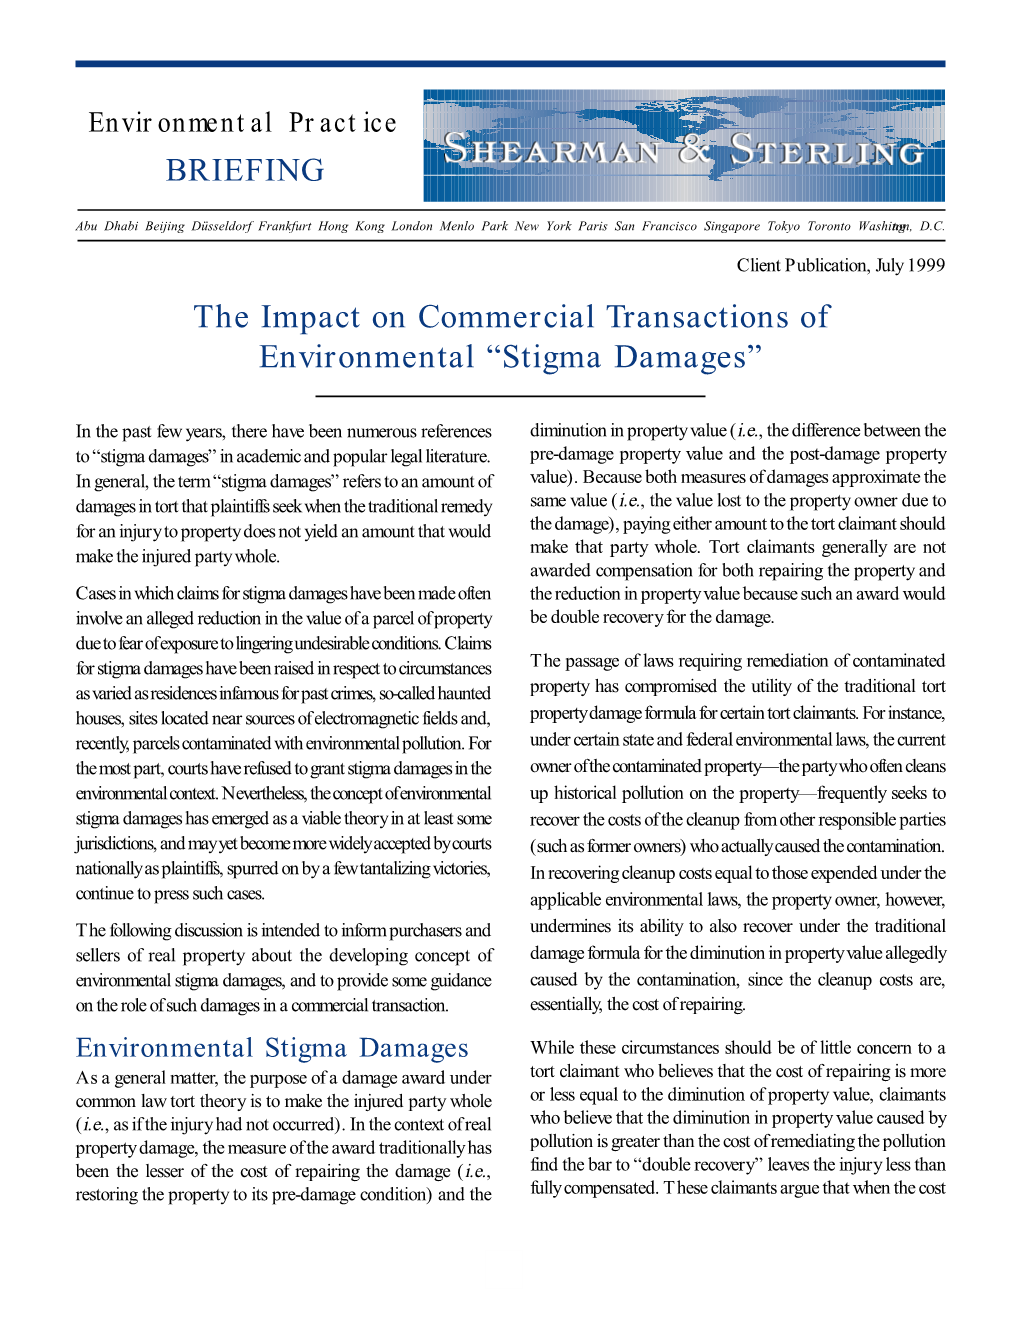 The Impact on Commercial Transactions of Environmental “Stigma Damages”